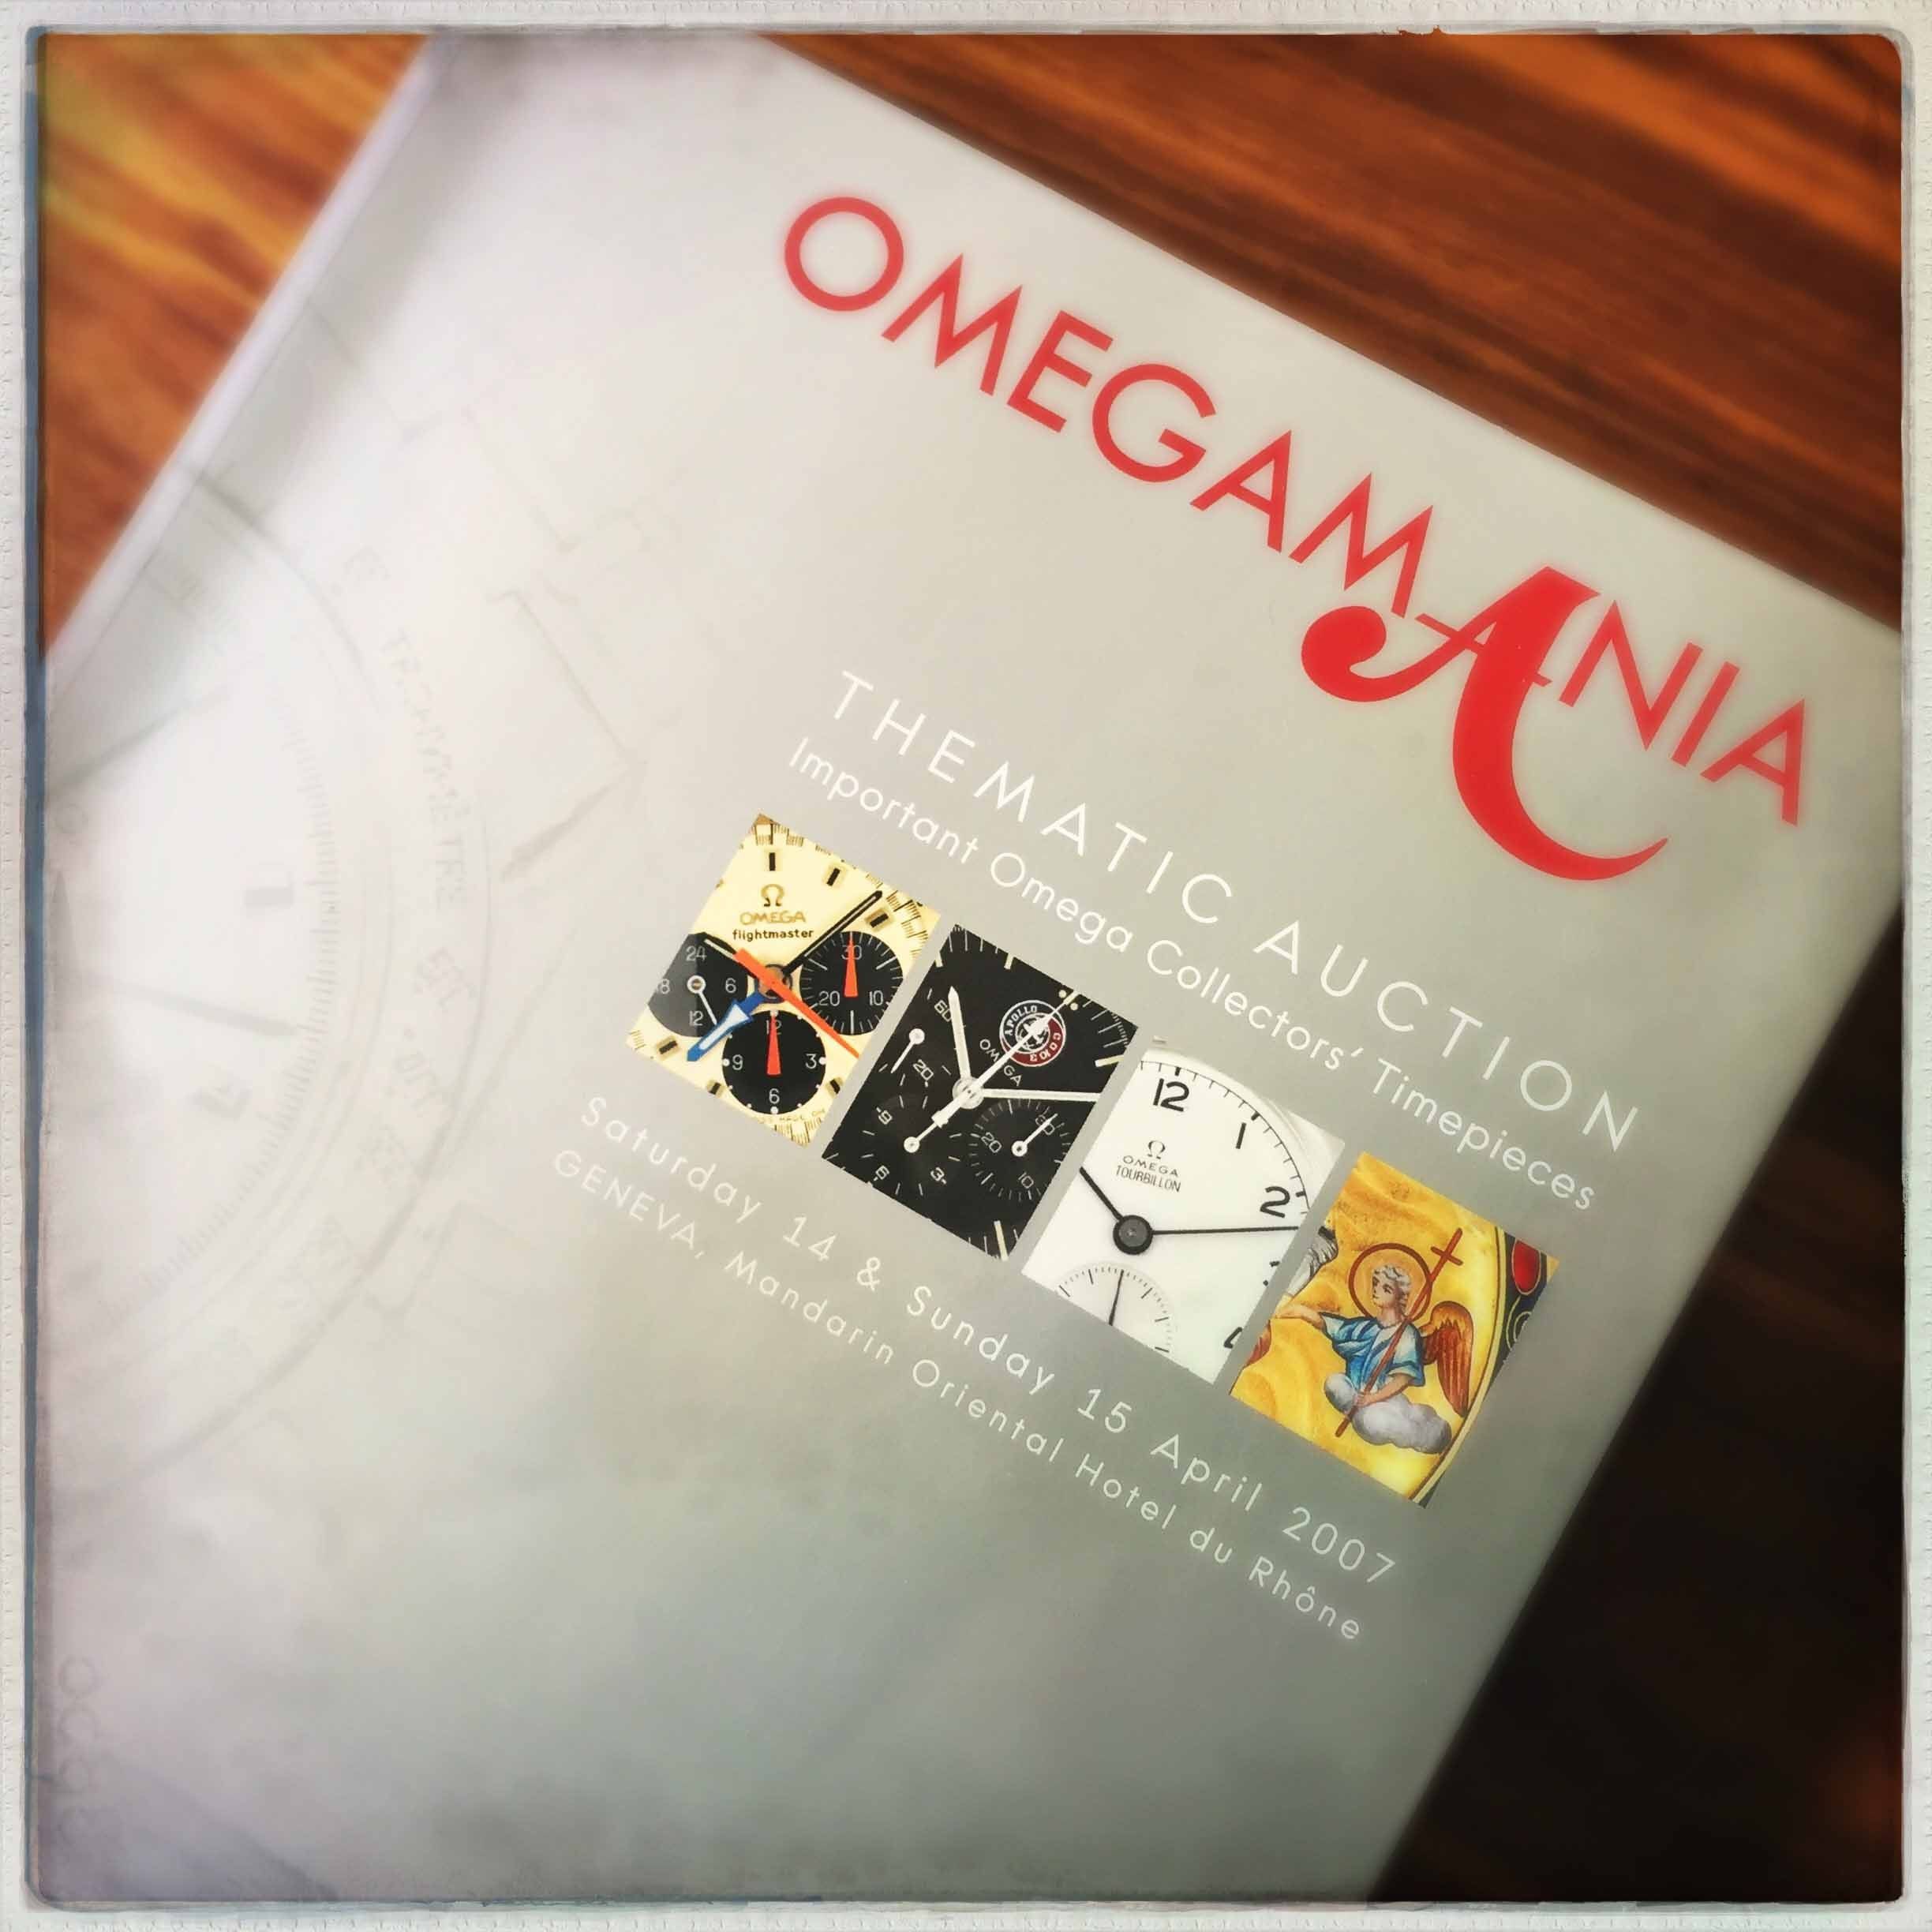 OMEGAMANIA thematic auction catalog. 606 pages dripping with vintage ...